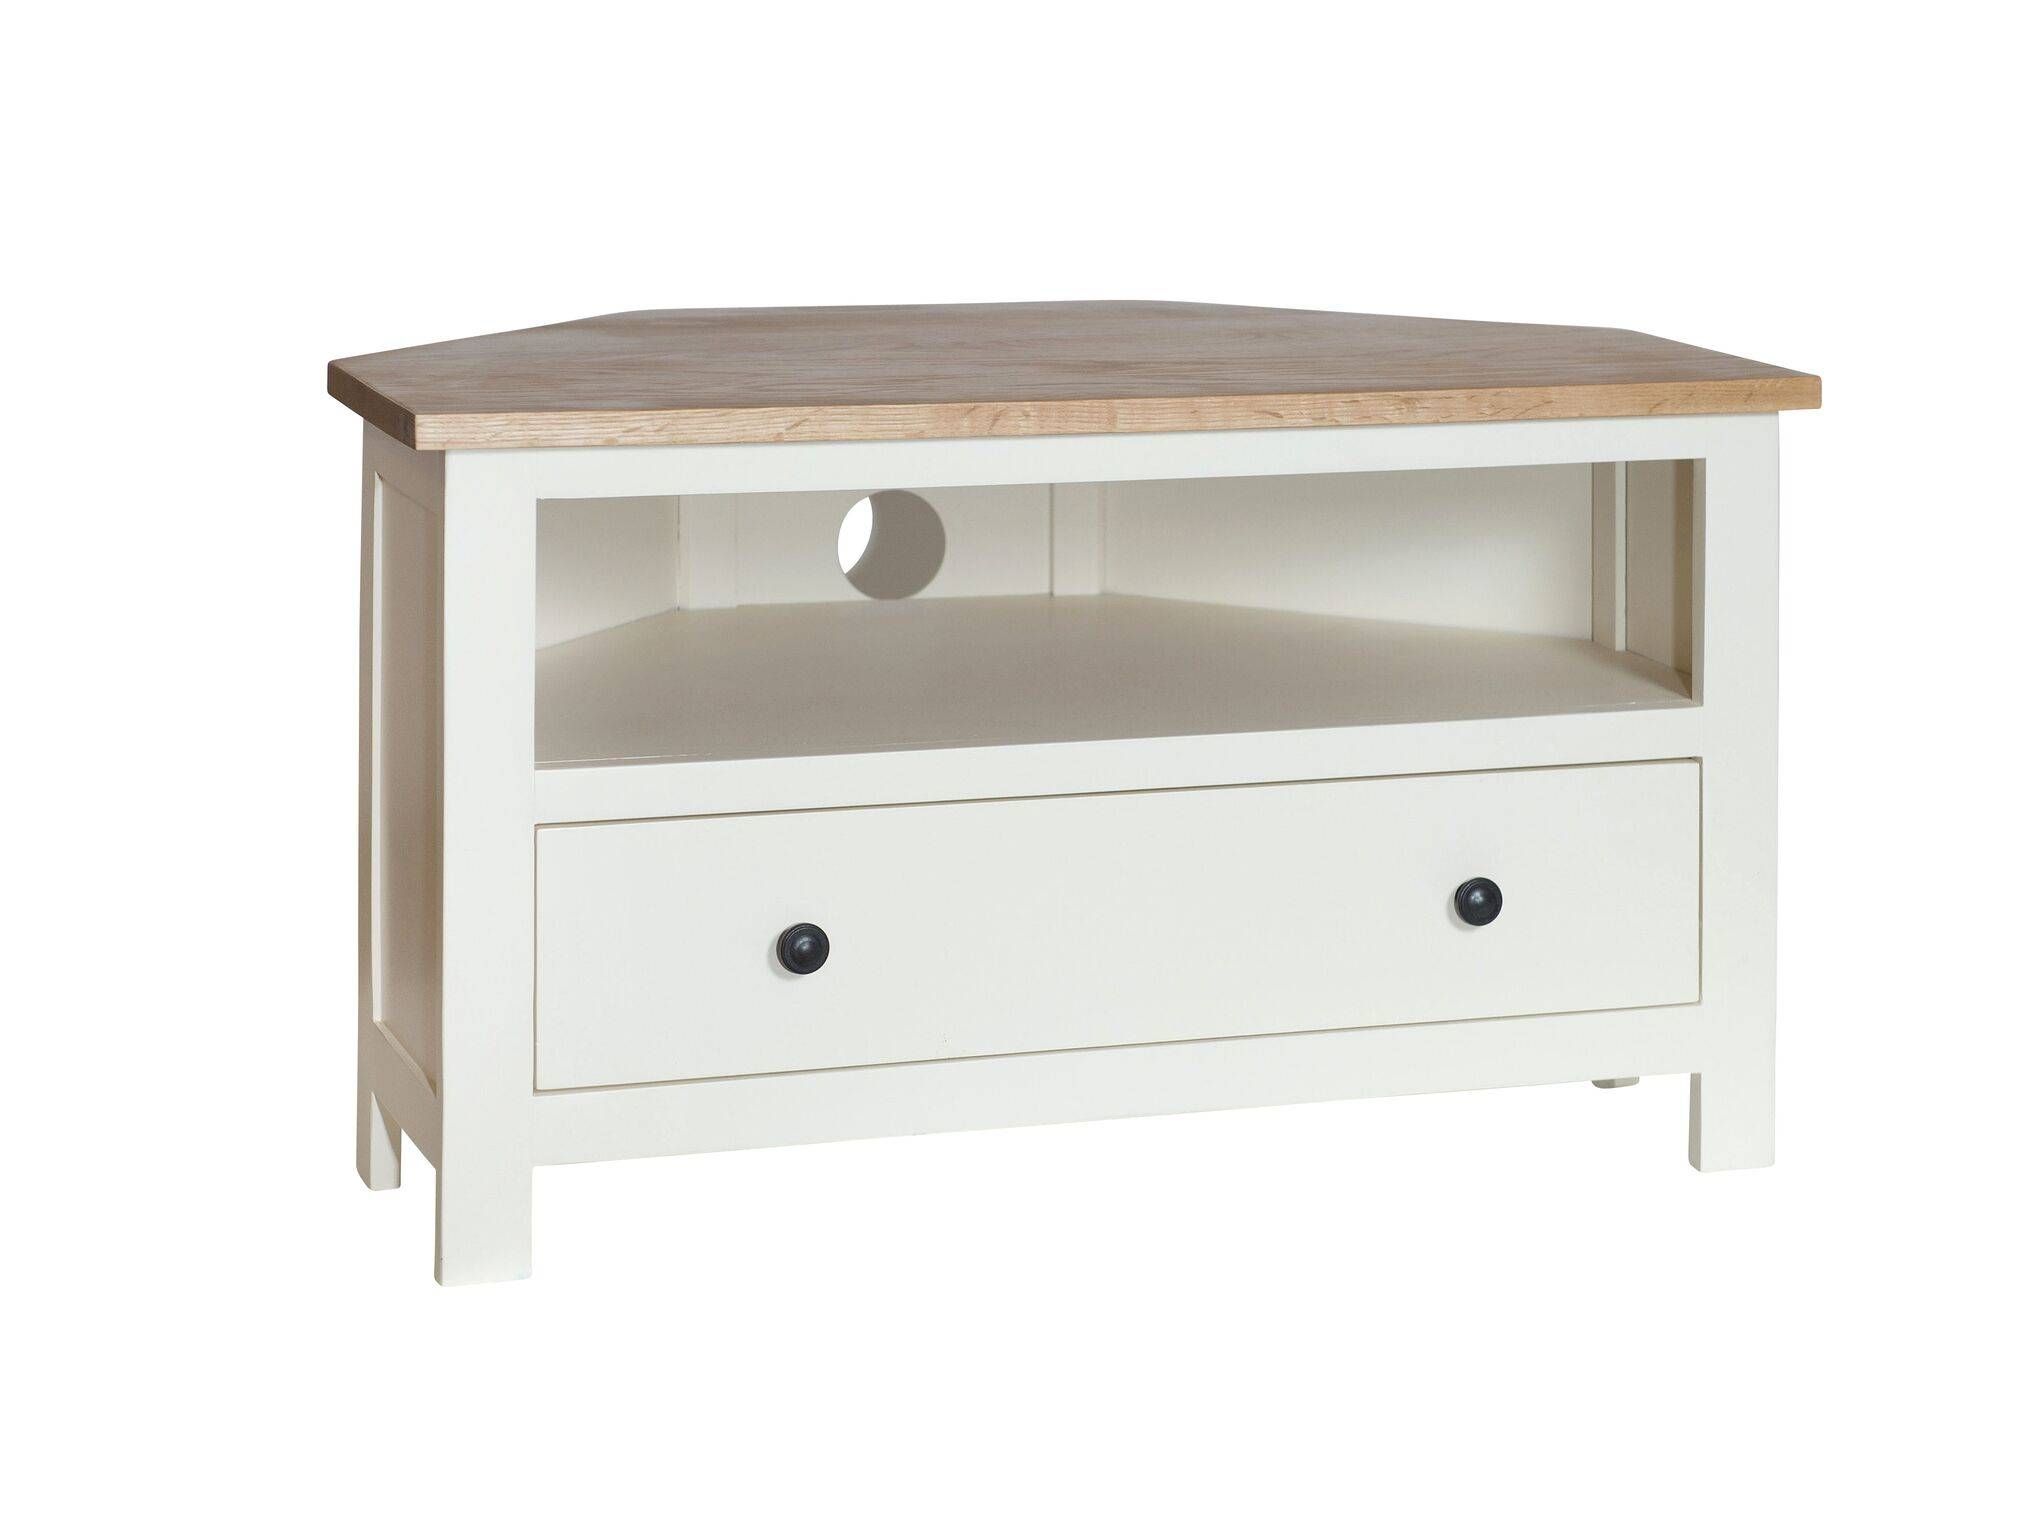 S0 – Cream Painted Oak Top Corner Tv Unit – Country Furniture Barn In Painted Corner Tv Cabinets (View 14 of 15)